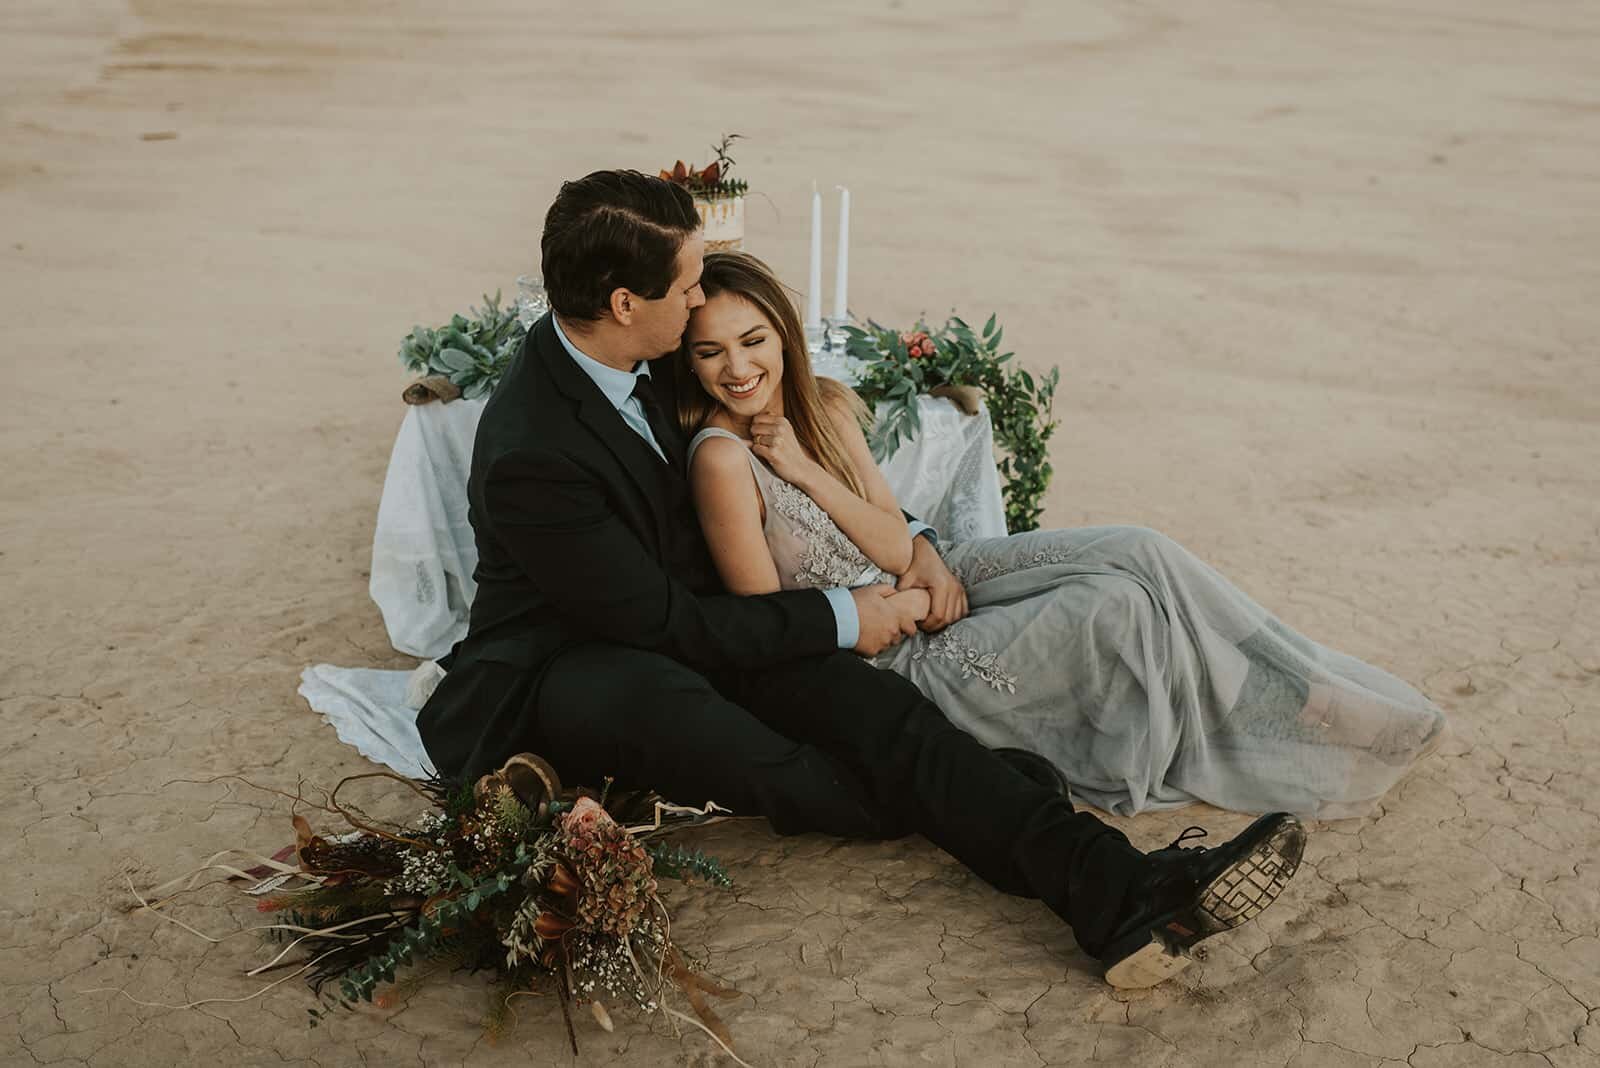 A Dry Lakebed Elopement